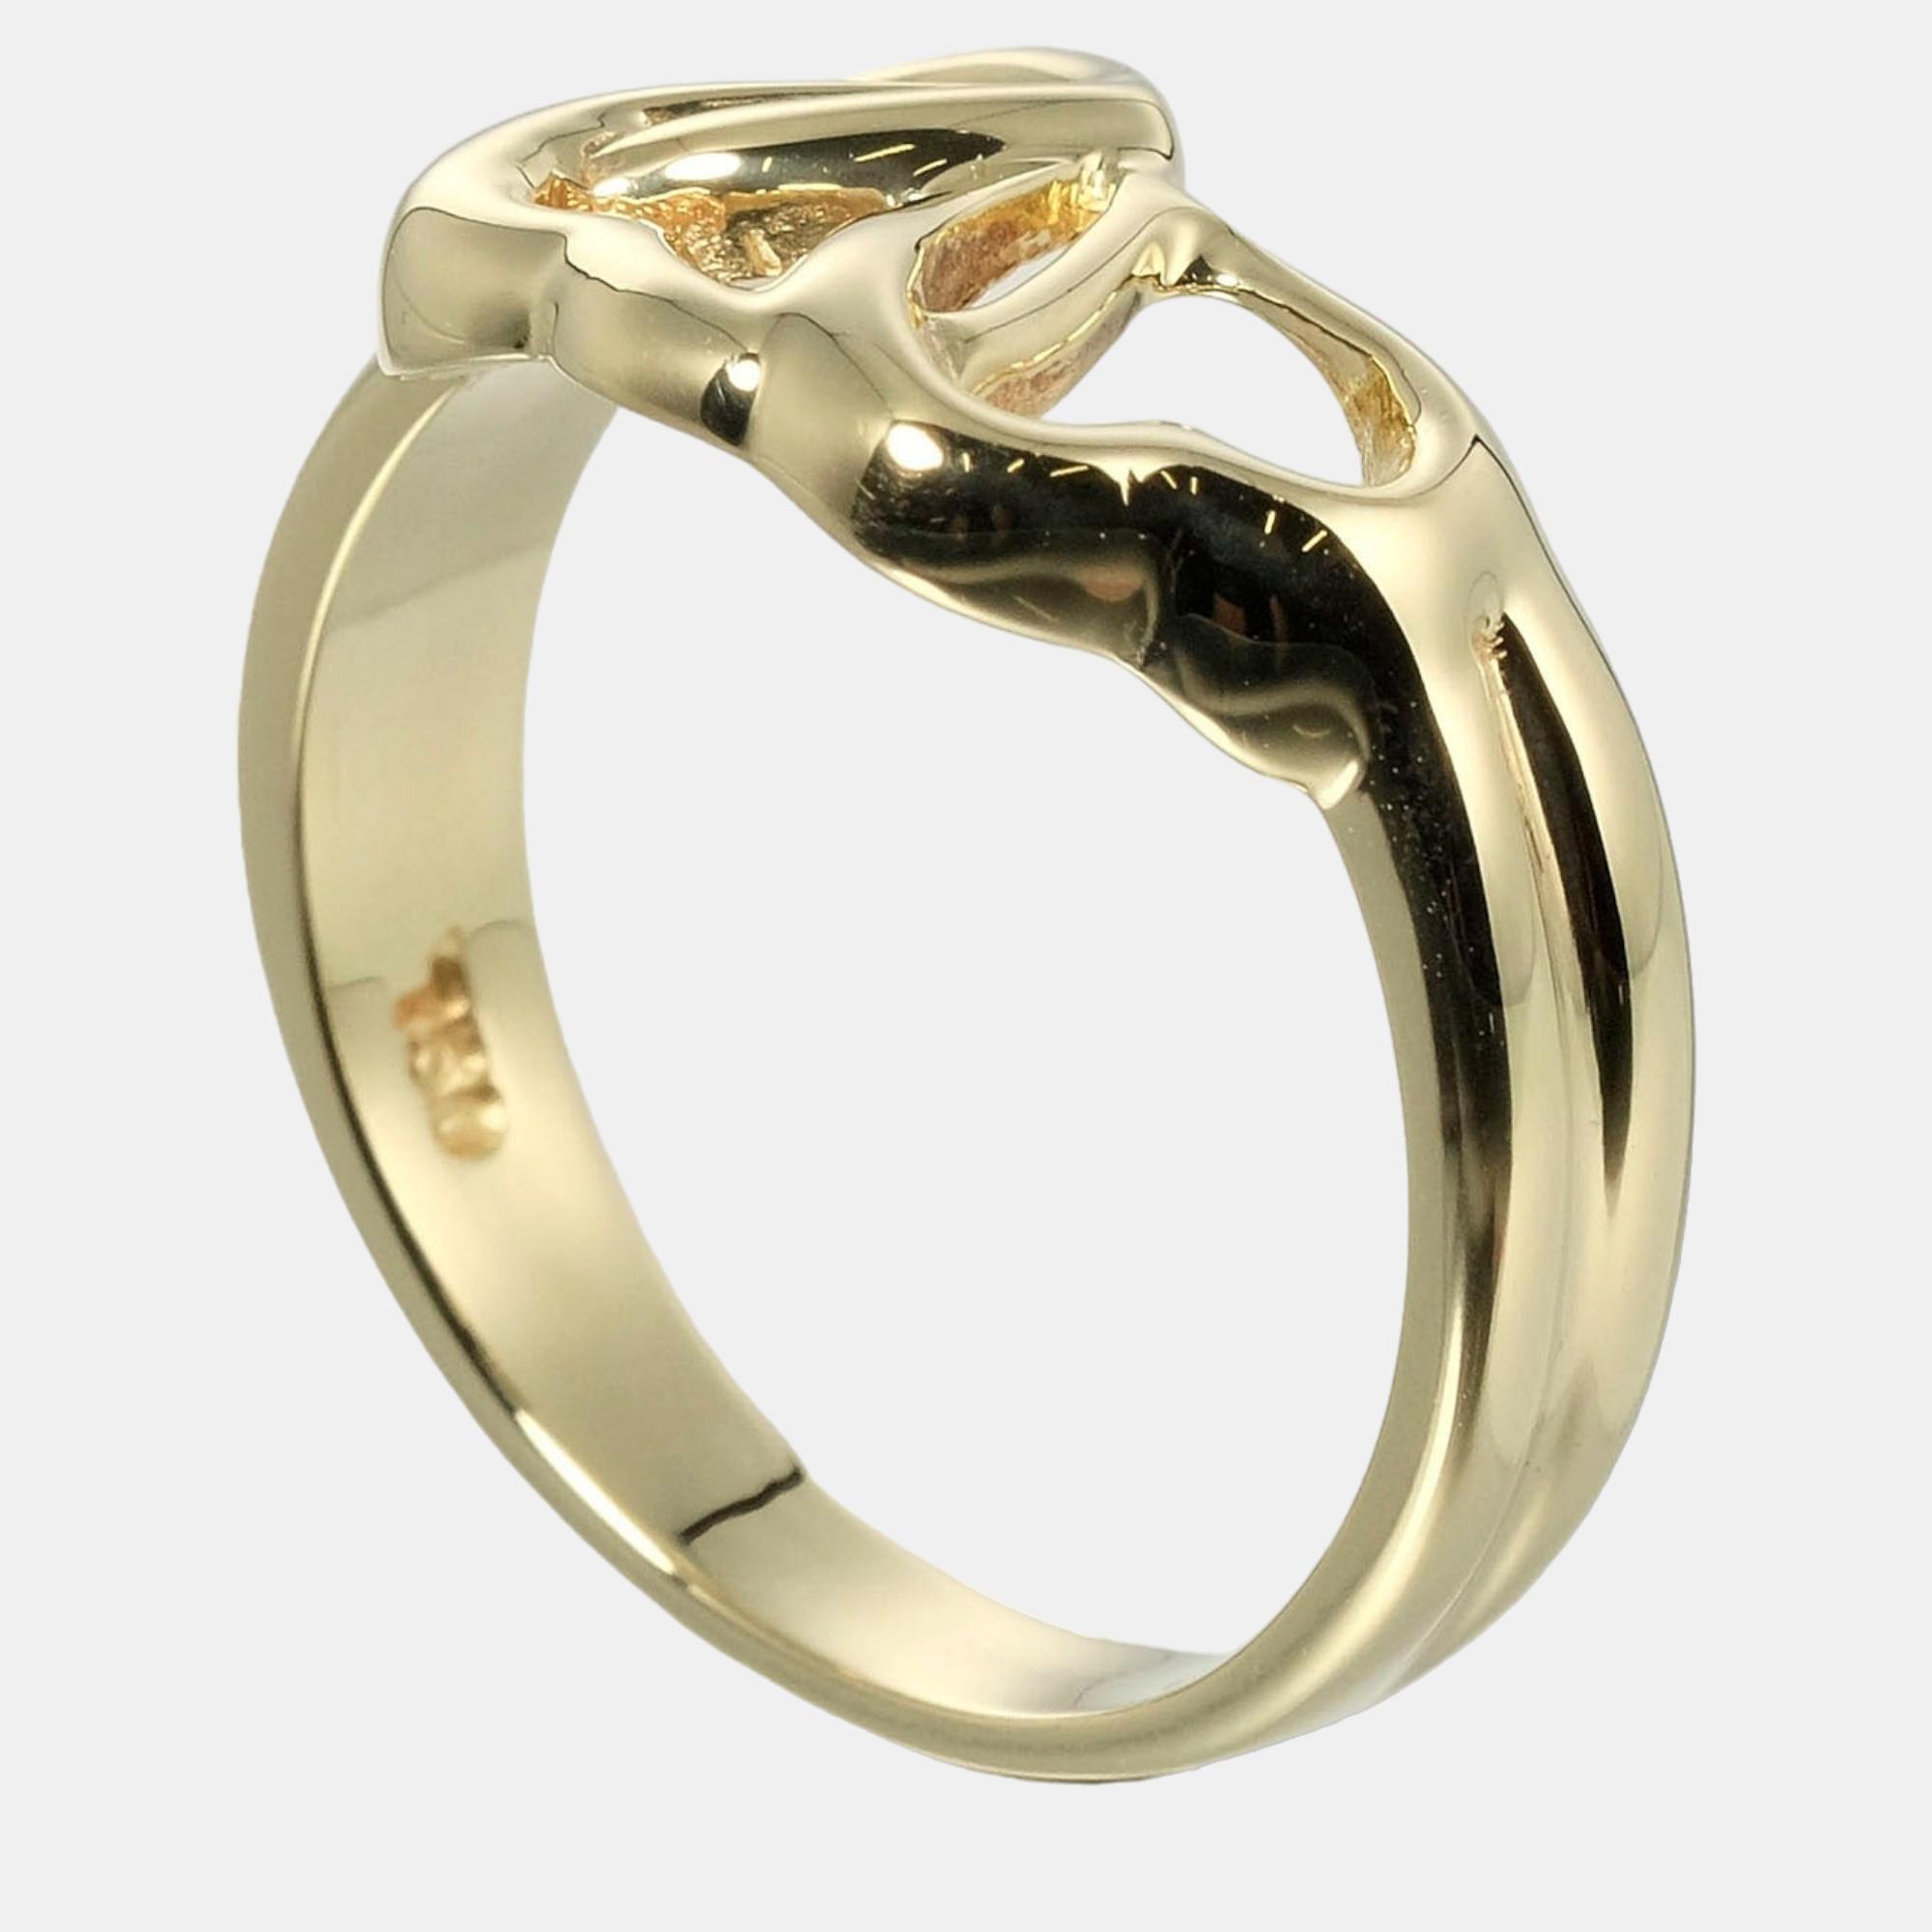 Tiffany & Co Gold Yellow Gold Triple Heart Ring Jewelry